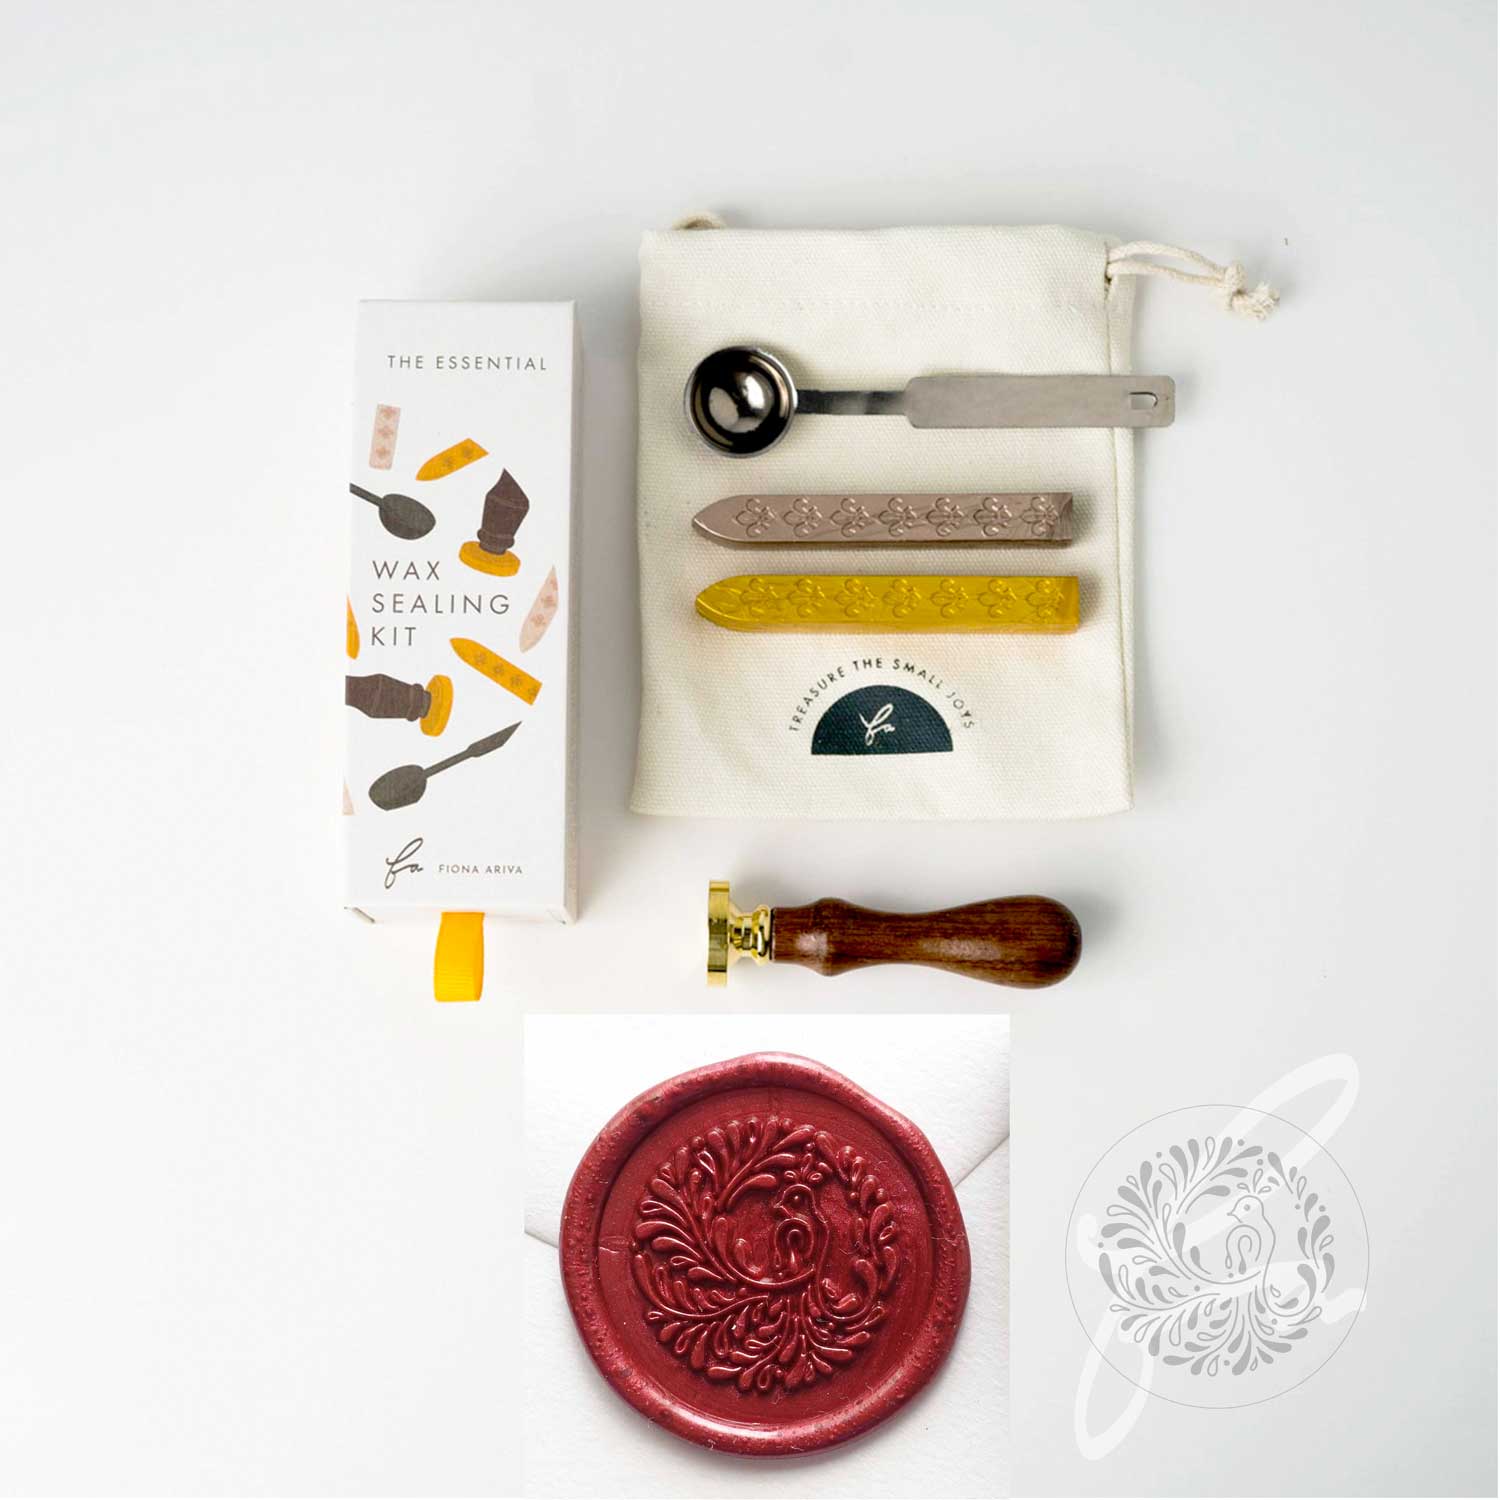 Fiona Ariva Song bird peacock wax seal stamp set with spoon and wax in a gift box kit